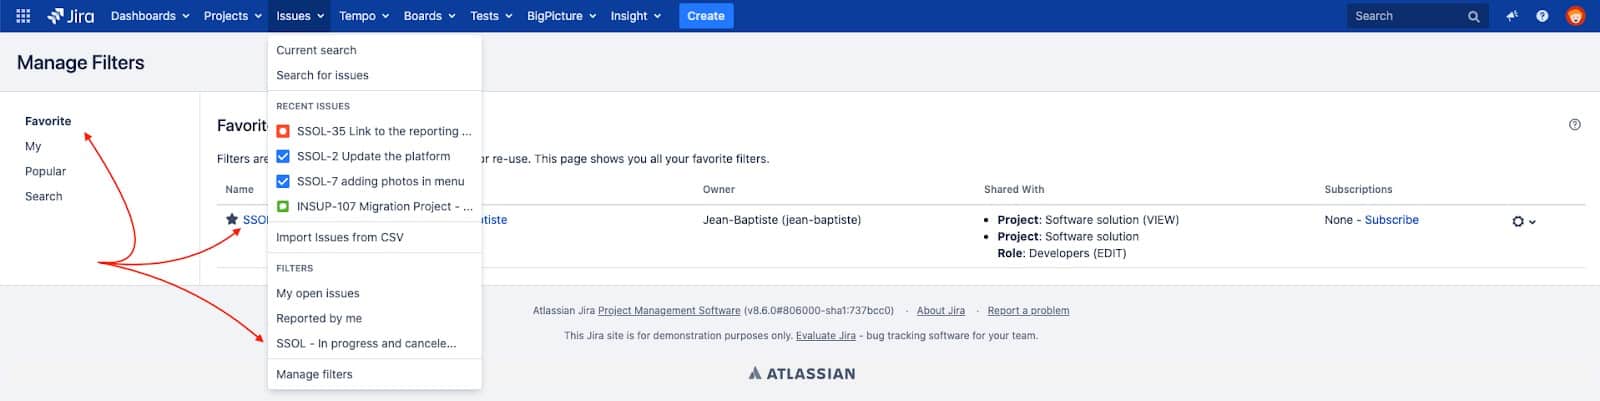 manage filters in jira 